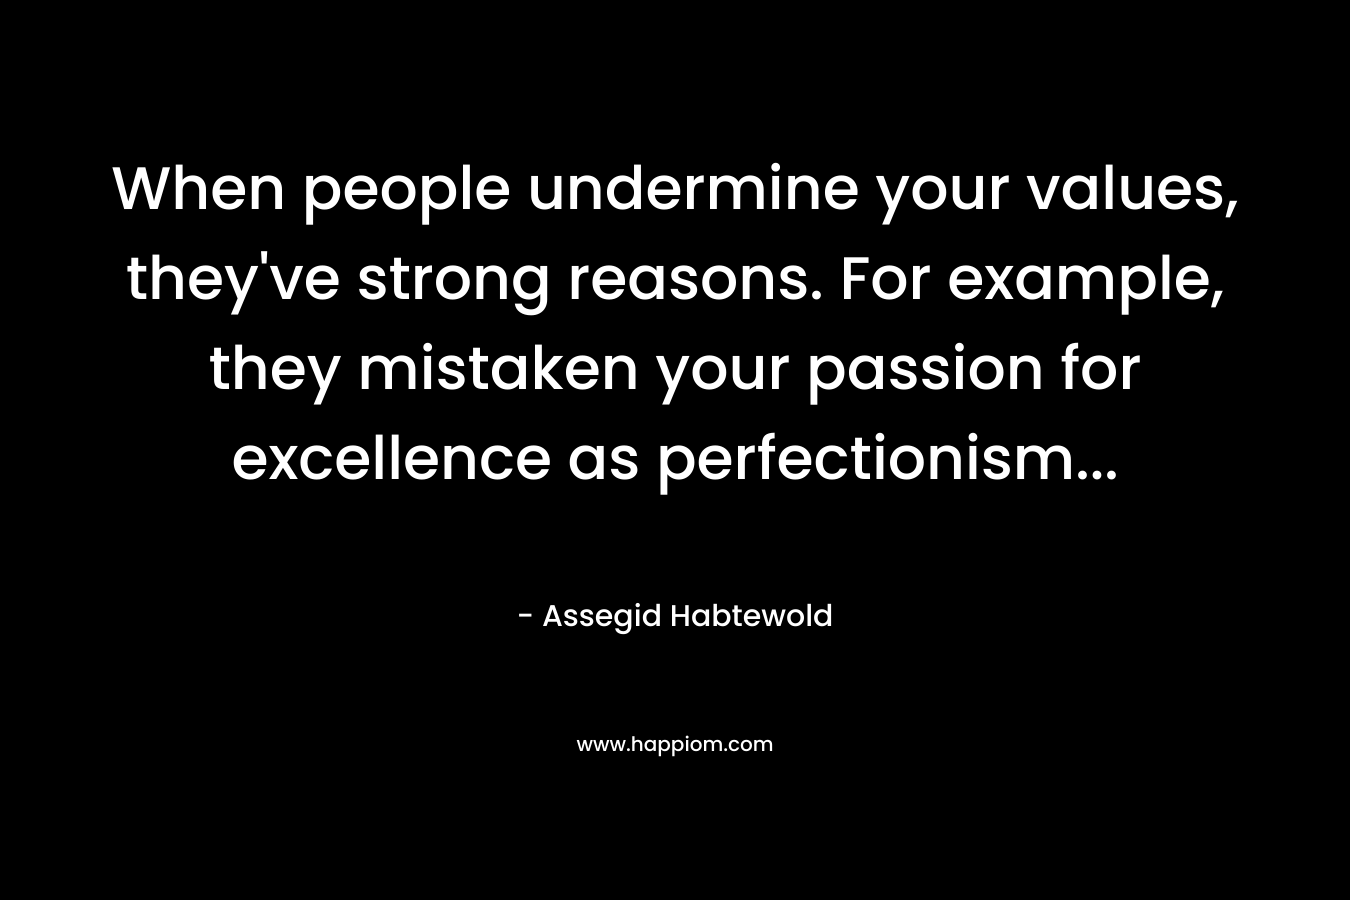 When people undermine your values, they’ve strong reasons. For example, they mistaken your passion for excellence as perfectionism… – Assegid Habtewold